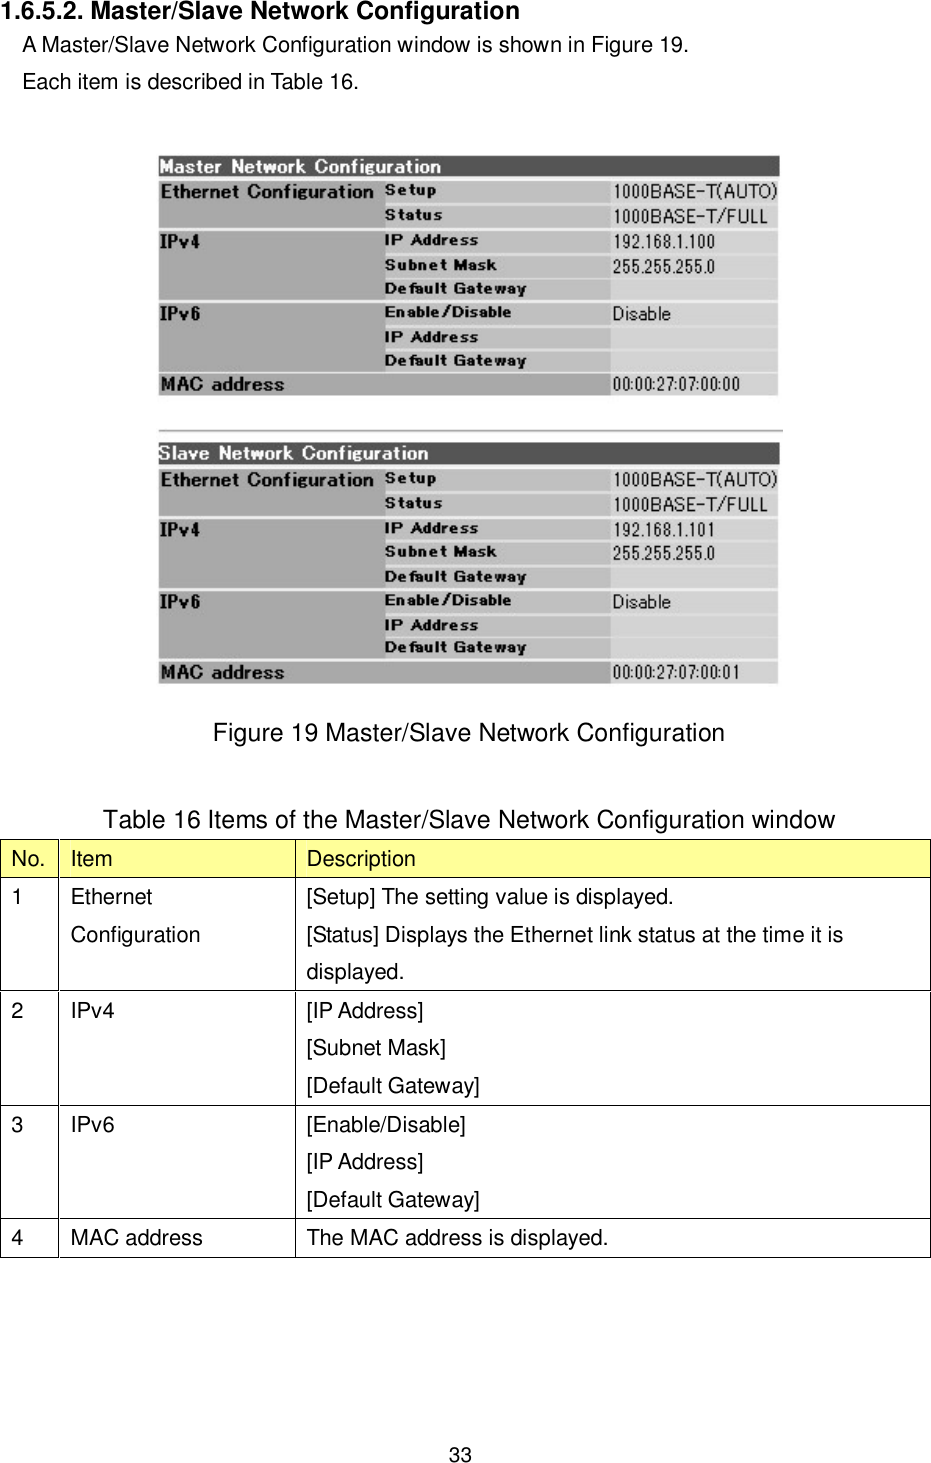    33  1.6.5.2. Master/Slave Network Configuration A Master/Slave Network Configuration window is shown in Figure 19. Each item is described in Table 16.   Figure 19 Master/Slave Network Configuration  Table 16 Items of the Master/Slave Network Configuration window No. Item  Description 1  Ethernet Configuration [Setup] The setting value is displayed. [Status] Displays the Ethernet link status at the time it is displayed. 2  IPv4  [IP Address] [Subnet Mask] [Default Gateway] 3  IPv6  [Enable/Disable] [IP Address] [Default Gateway] 4  MAC address  The MAC address is displayed.  